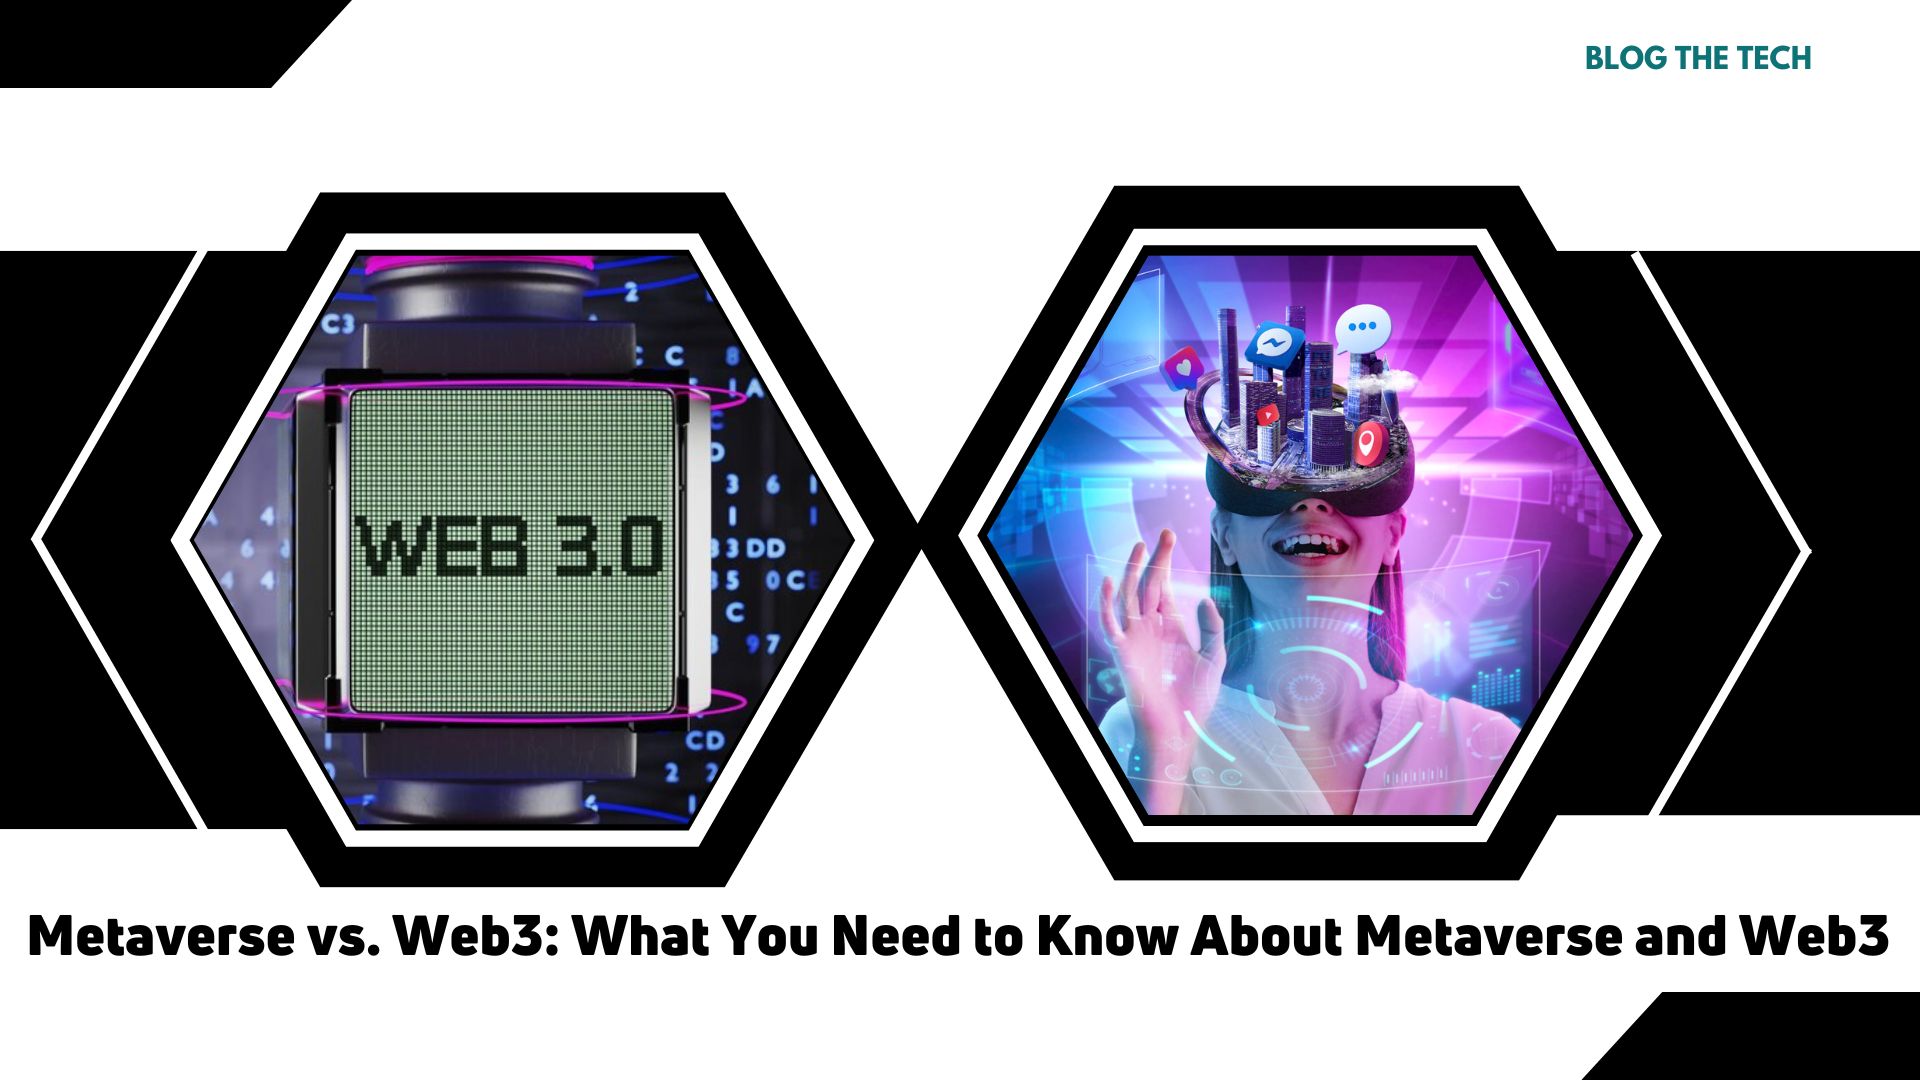 Metaverse vs. Web3: What You Need to Know About Metaverse and Web3